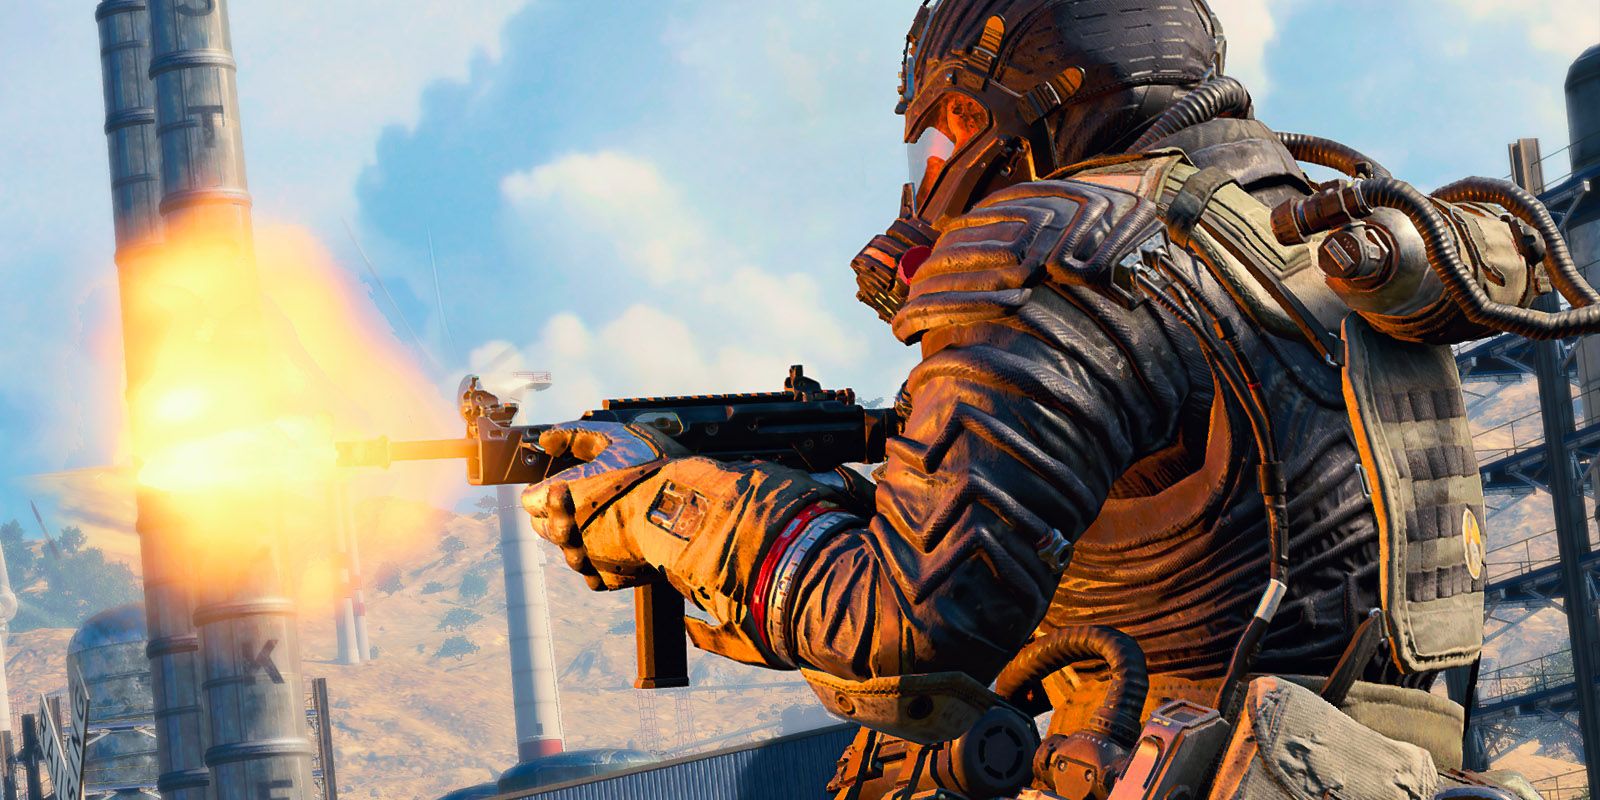 Call of Duty Black Ops 4 Review: Impressions for Blackout, Zombies